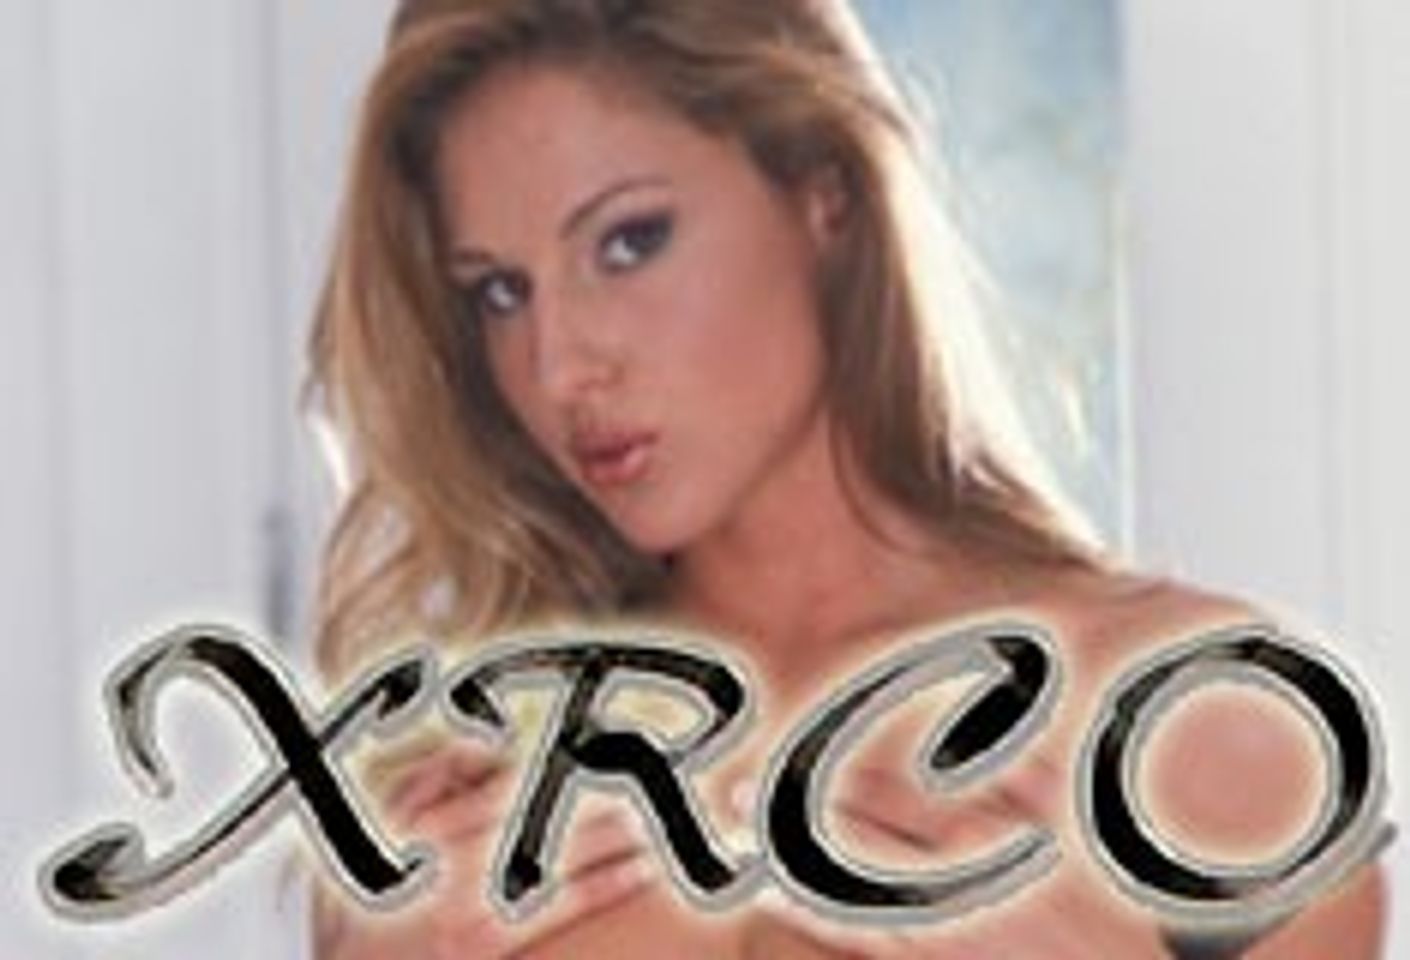 20th Annual XRCO Awards Show Confirmed for August 19, 2004